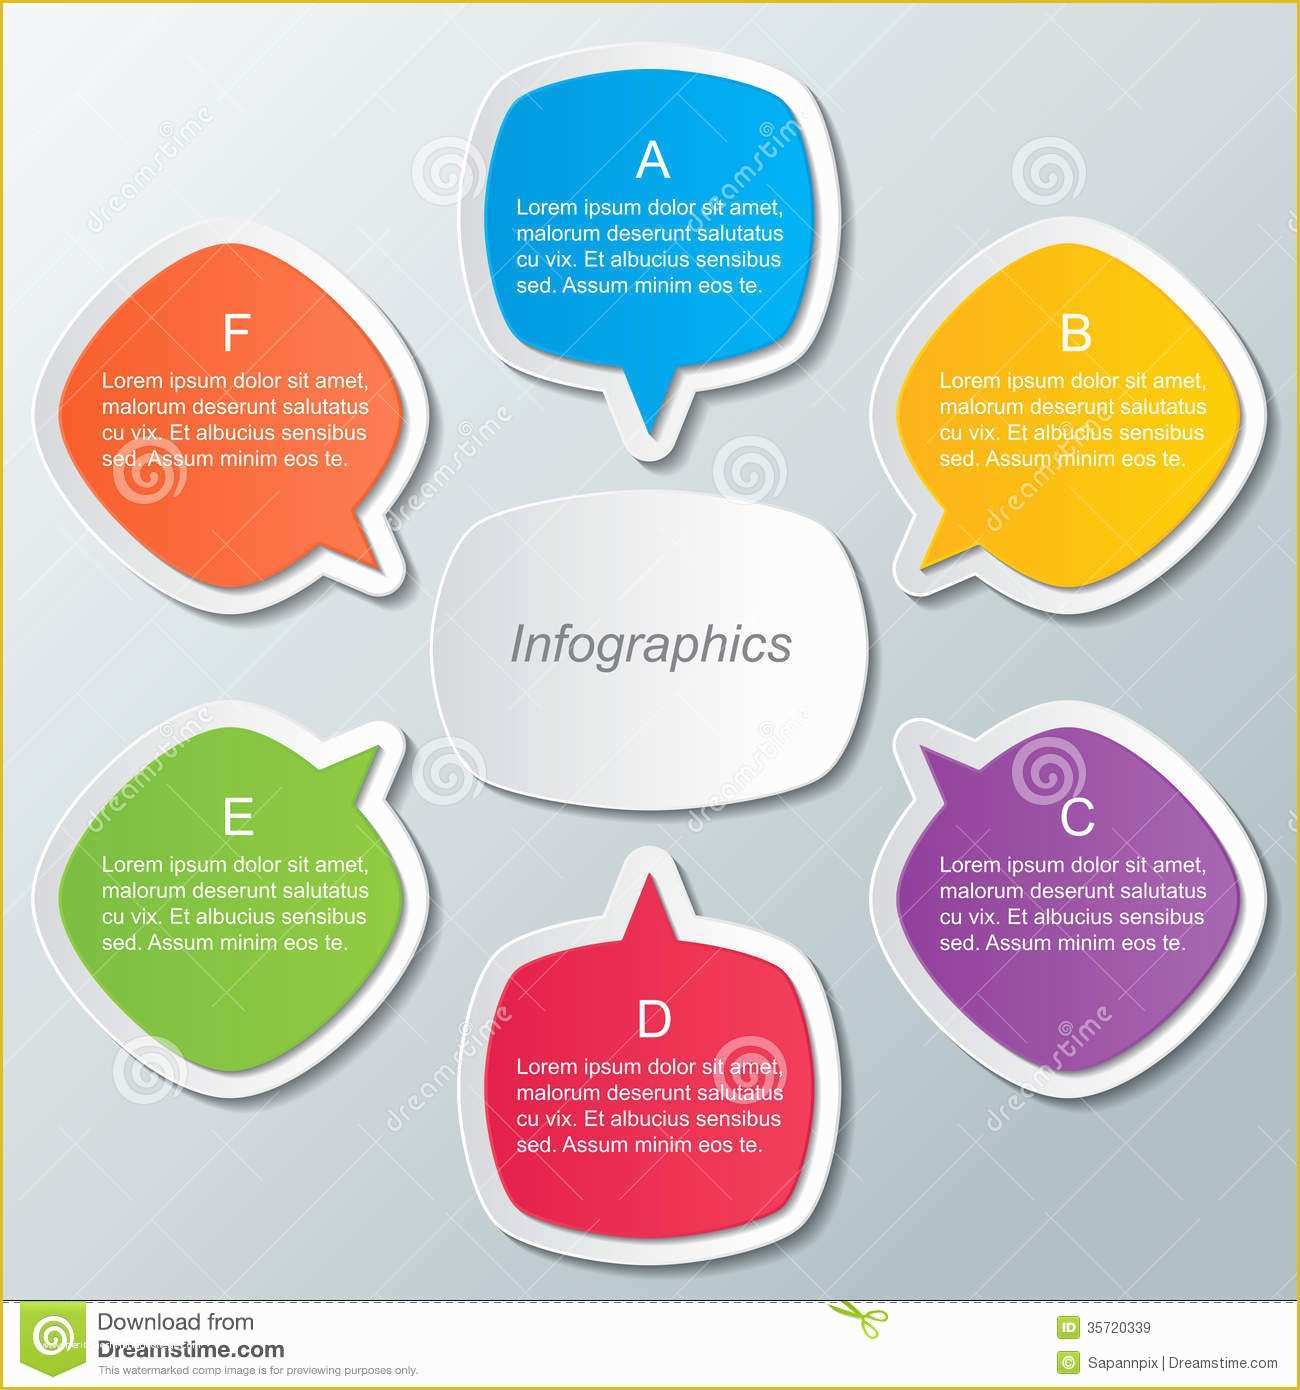 Free Infographic Templates for Word Of 19 Infographic Template Free Download Free